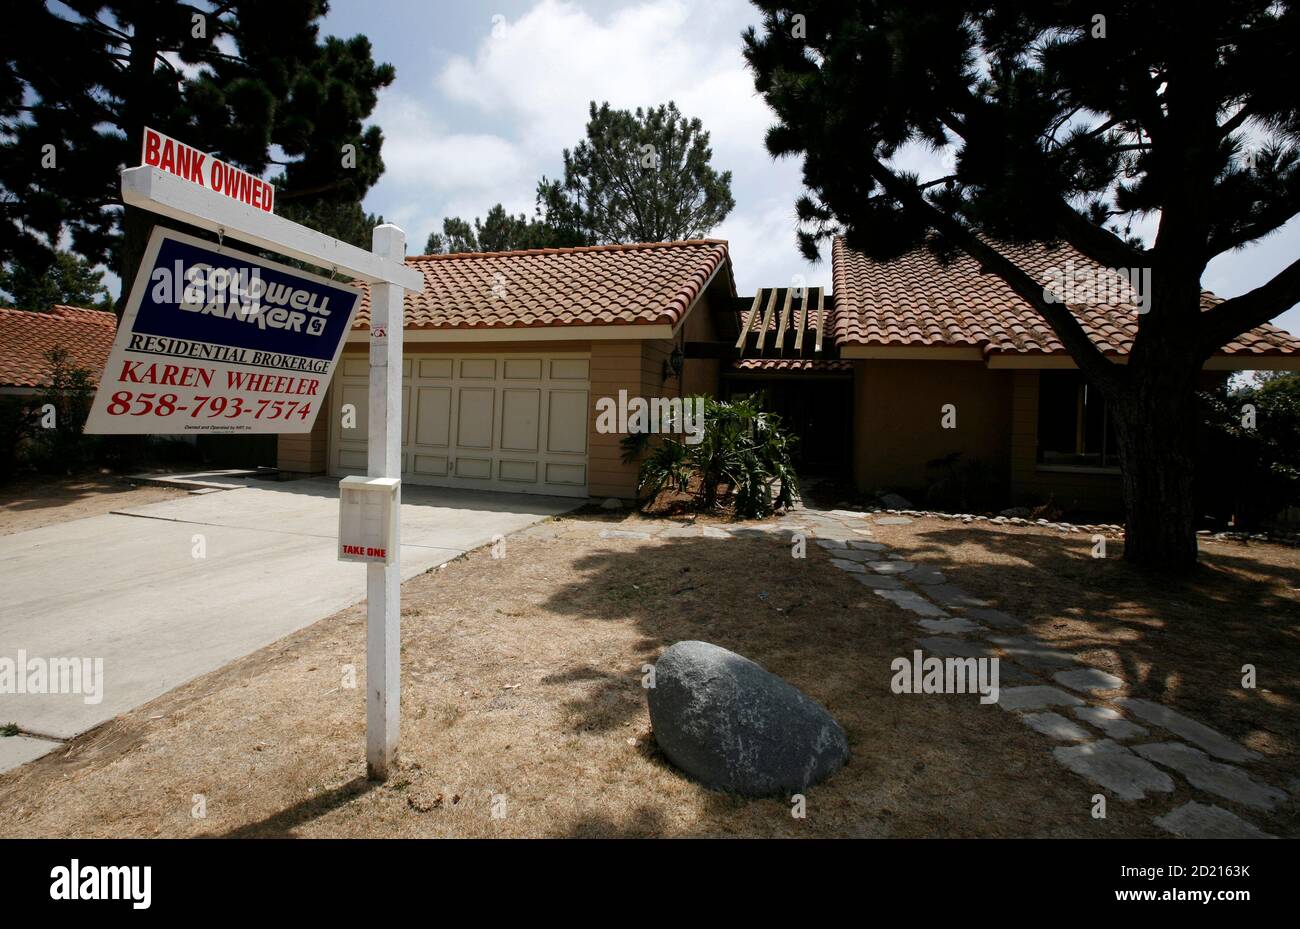 A bank-owned home is advertised for sale in Encinitas, California August 18, 2009. Southern California home sales were up 19 percent in July from the same month a year ago in the area including Los Angeles, Orange, Ventura, Riverside, San Bernardino and San Diego counties. But the median sale price of $268,000 was down 23 percent from July 2008, according to San Diego-based MDA DataQuick. The percentage of homes sold that had been previously foreclosed fell to 43 percent, down from a peak of 57 percent in February.    REUTERS/Mike Blake  (UNITED STATES BUSINESS POLITICS) Stock Photo